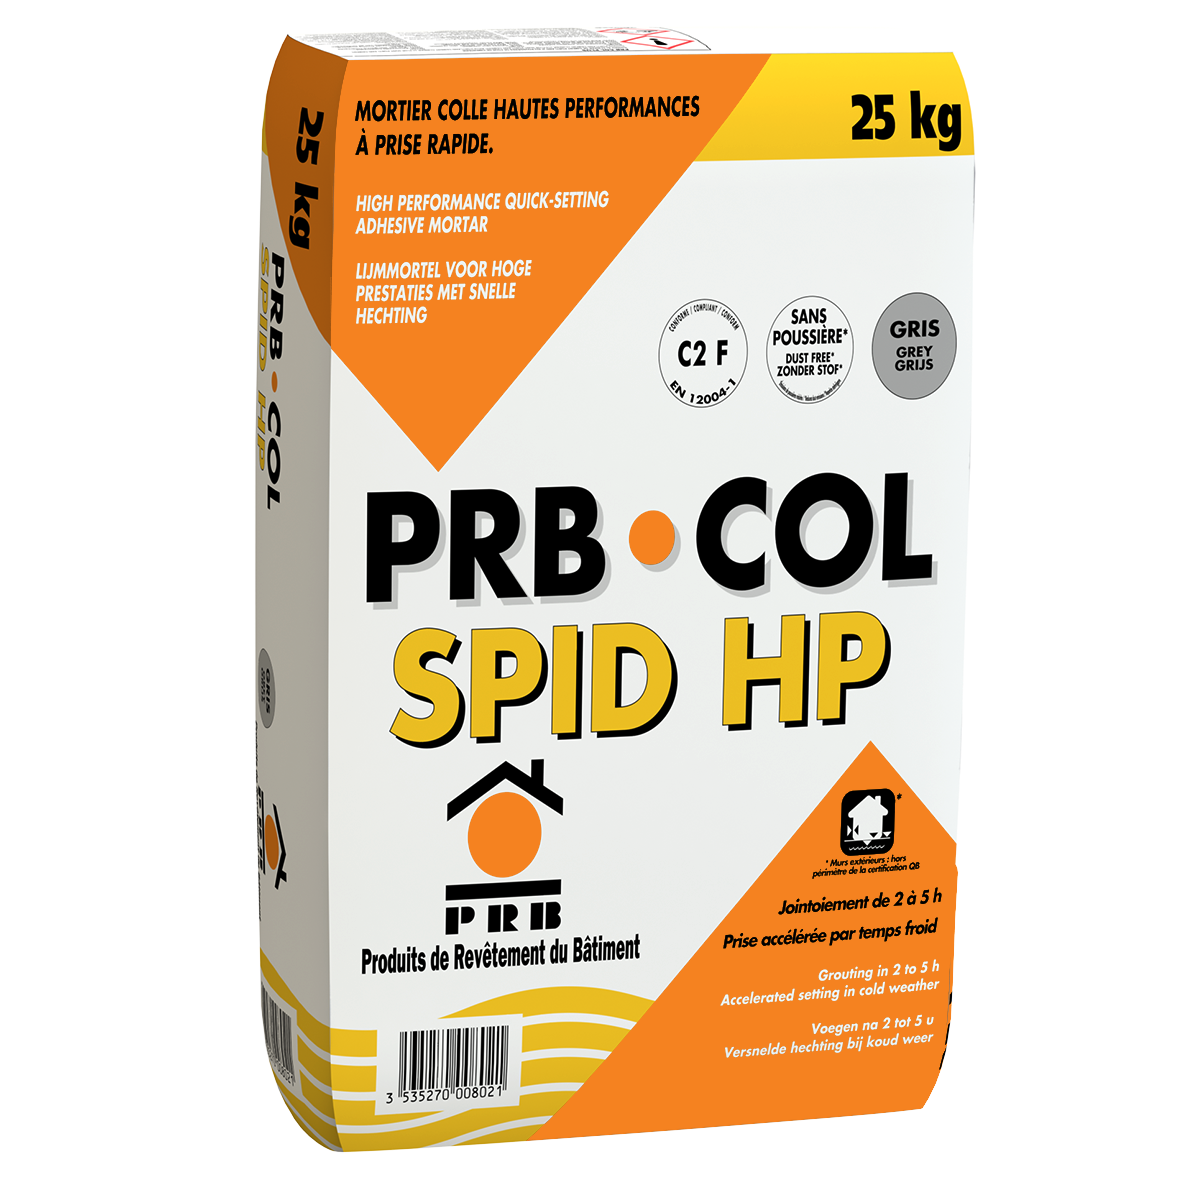 mortier-colle-carrelage-prb-colspidhp-0